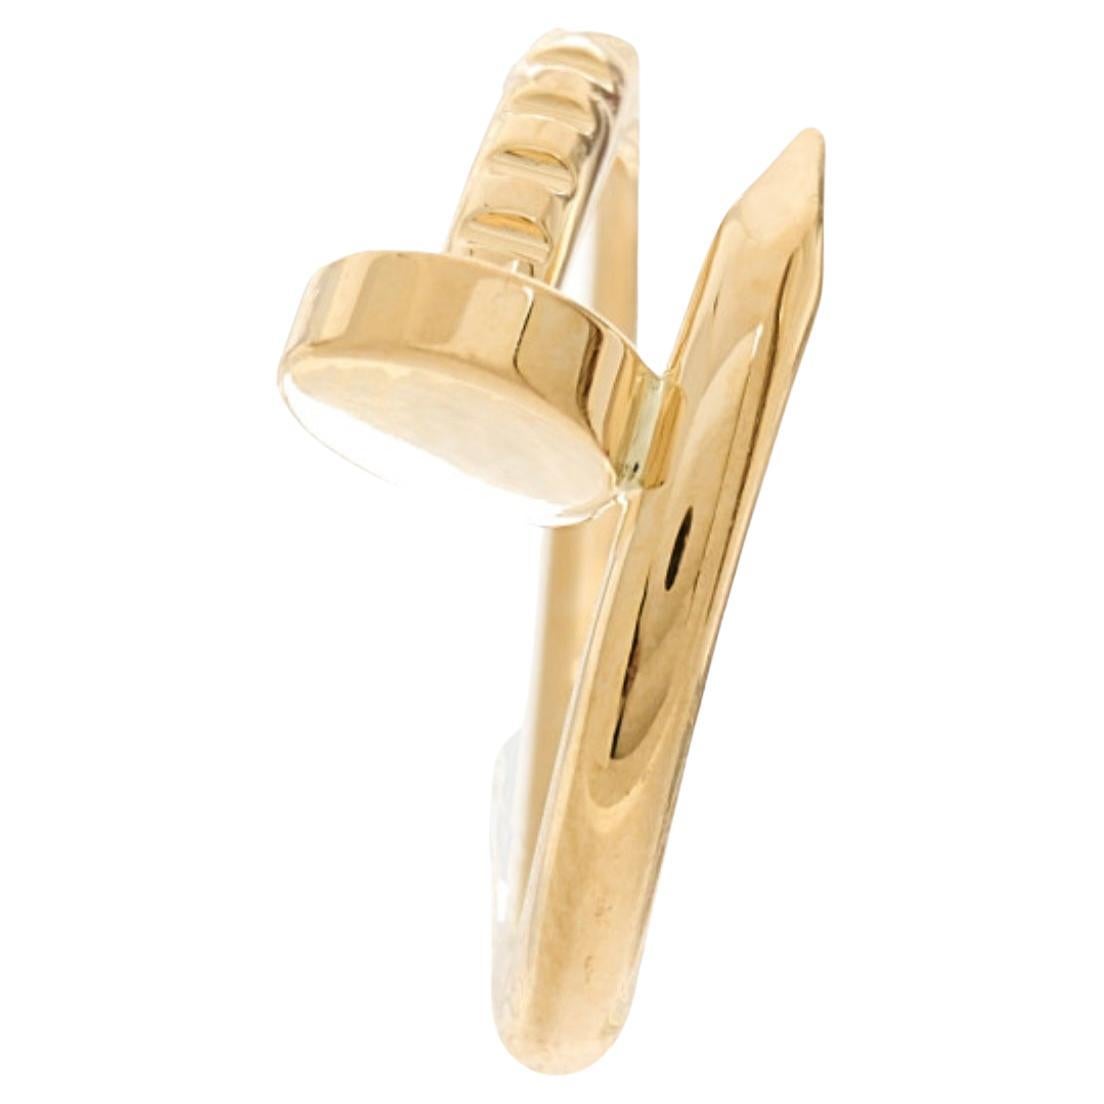 Cartier Just Ankle Nail Ring SYZ313 18k Gelbgold AU750 AUTHENTIC  Zertifikat im Angebot